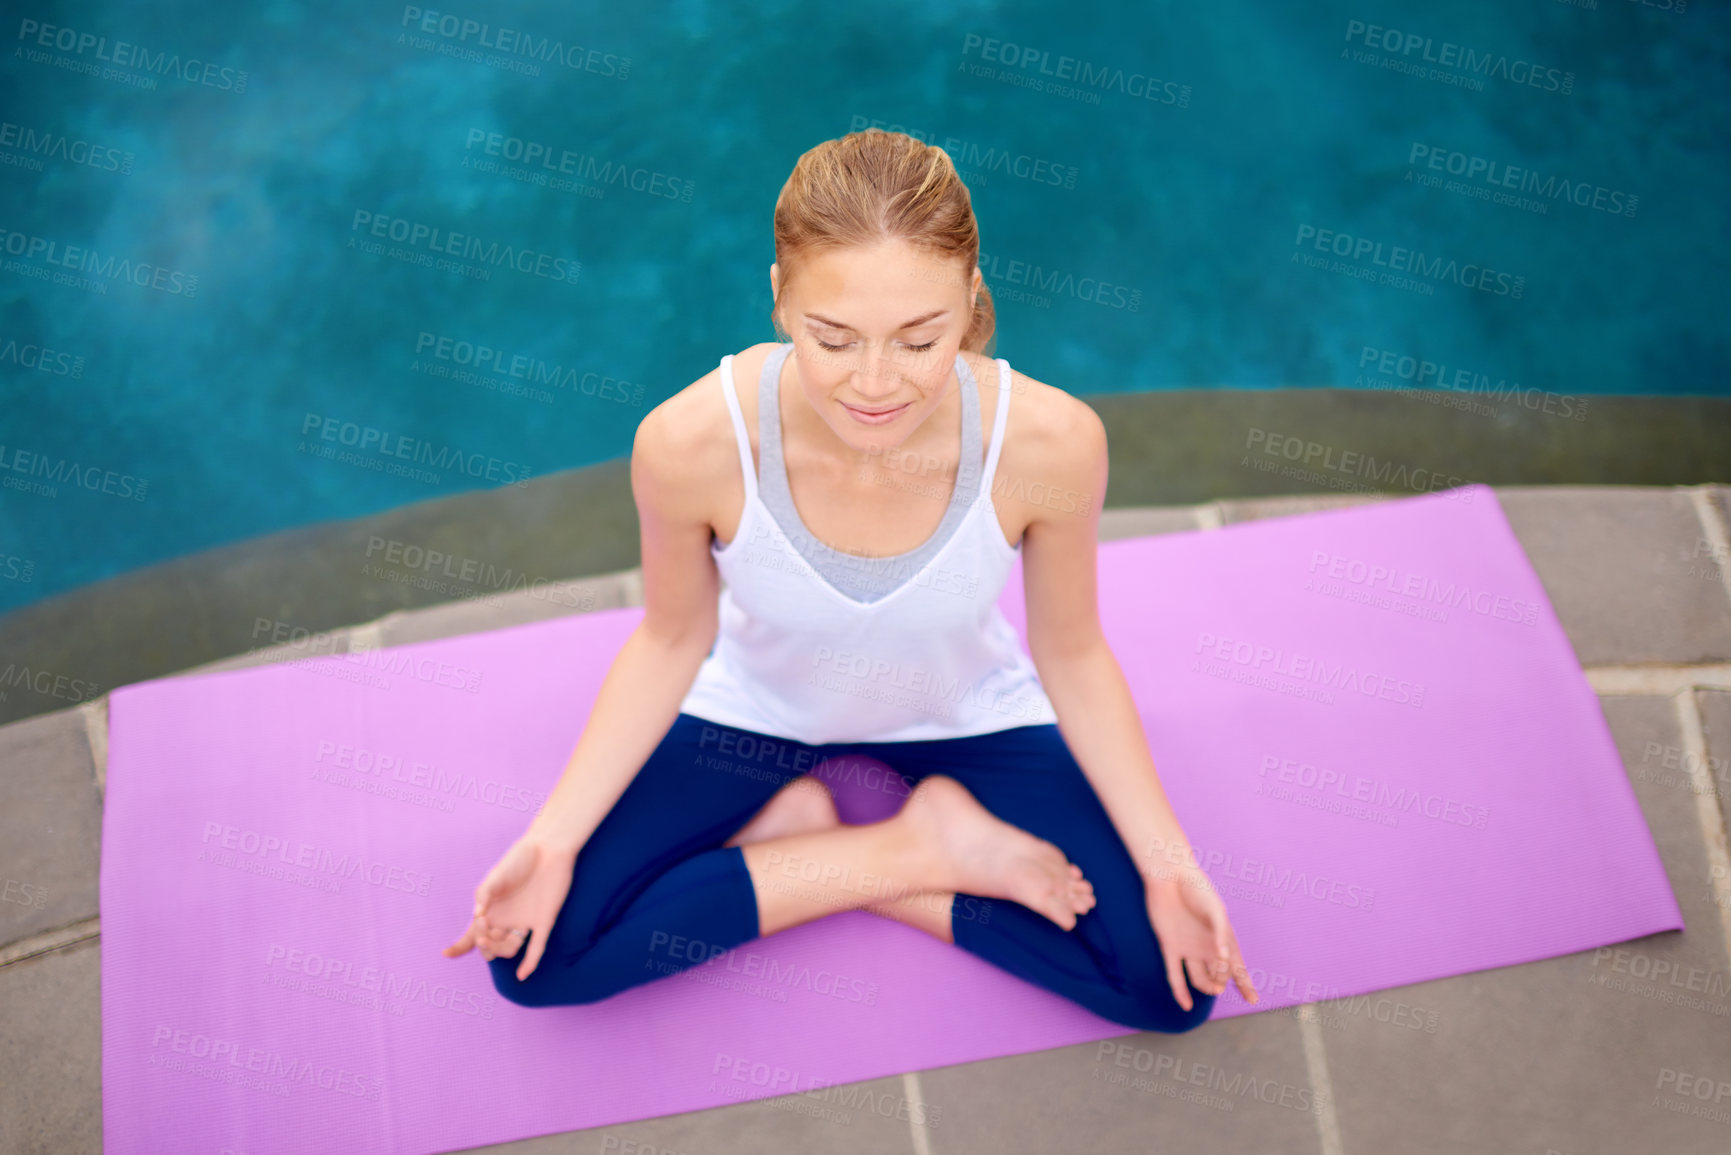 Buy stock photo Shot of a young woman doing yoga next to a swimming pool outside